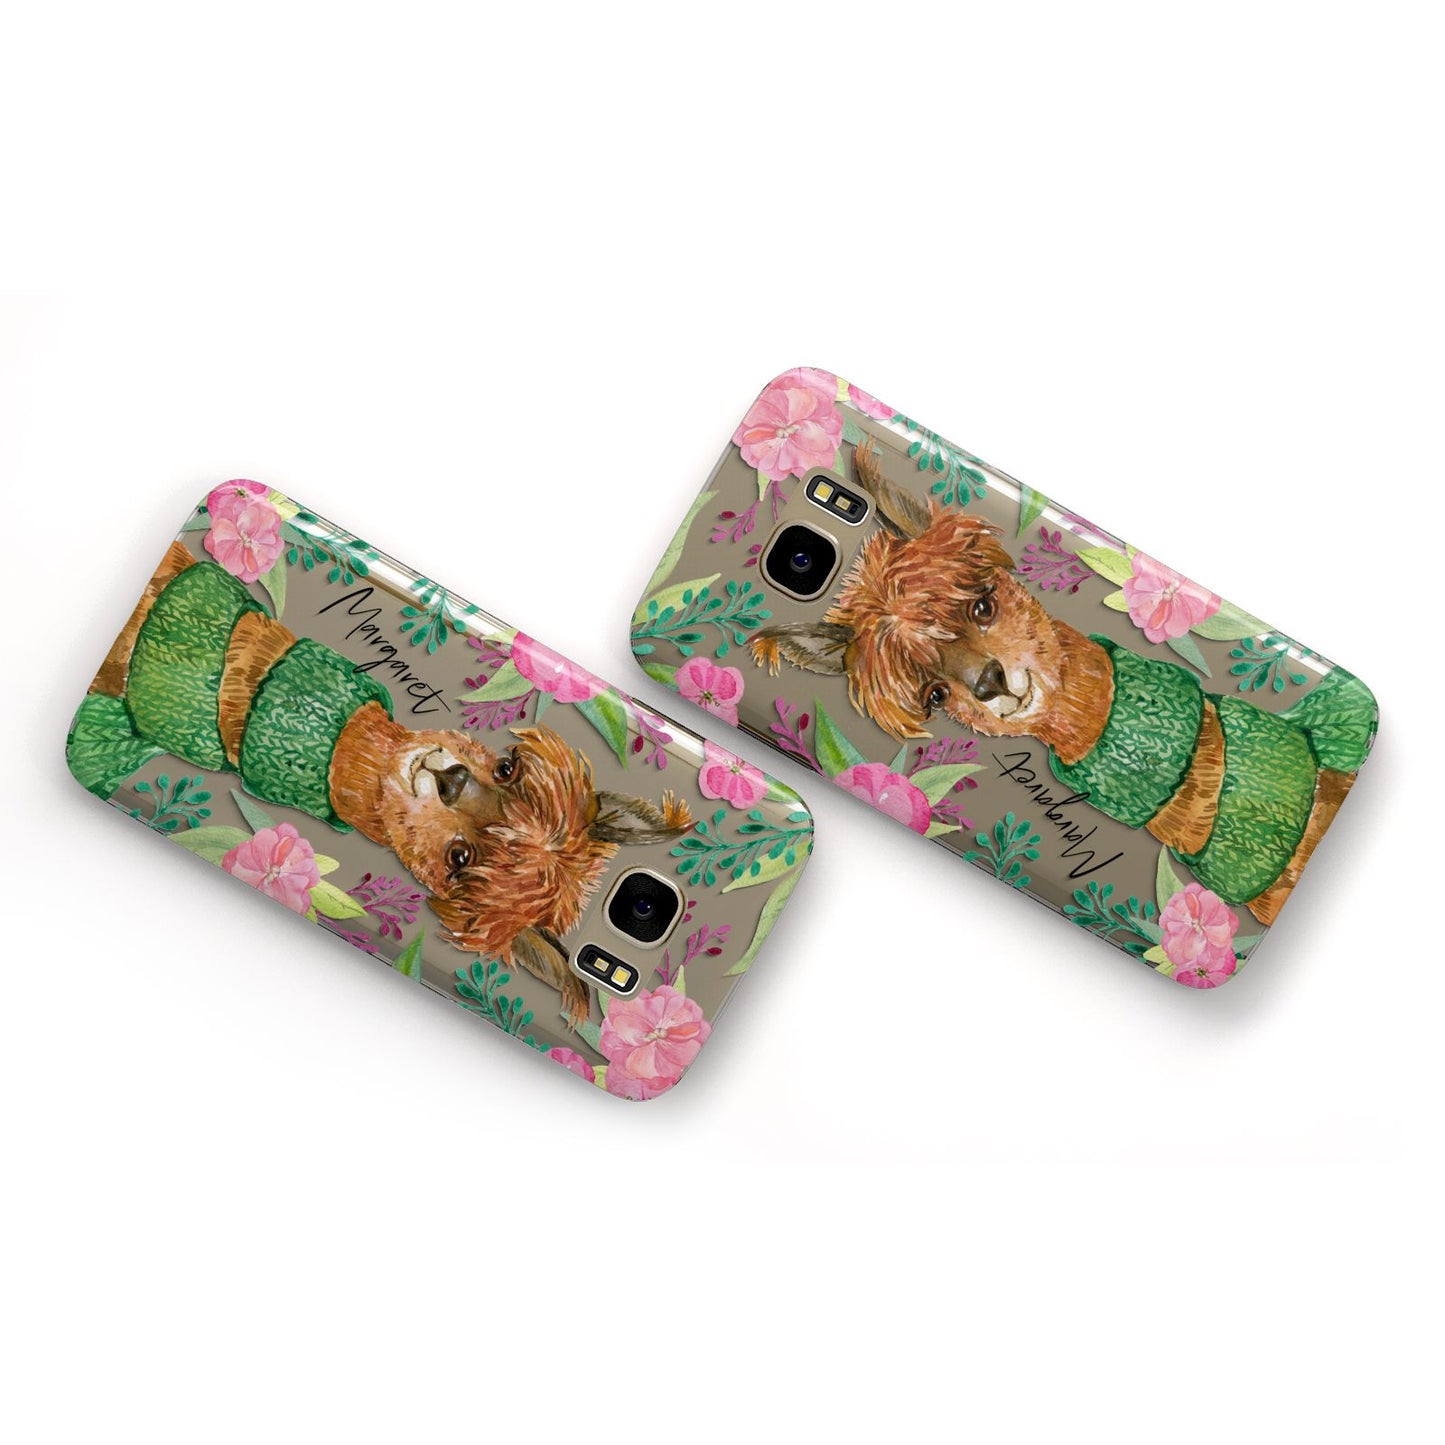 Personalised Alpaca Samsung Galaxy Case Flat Overview